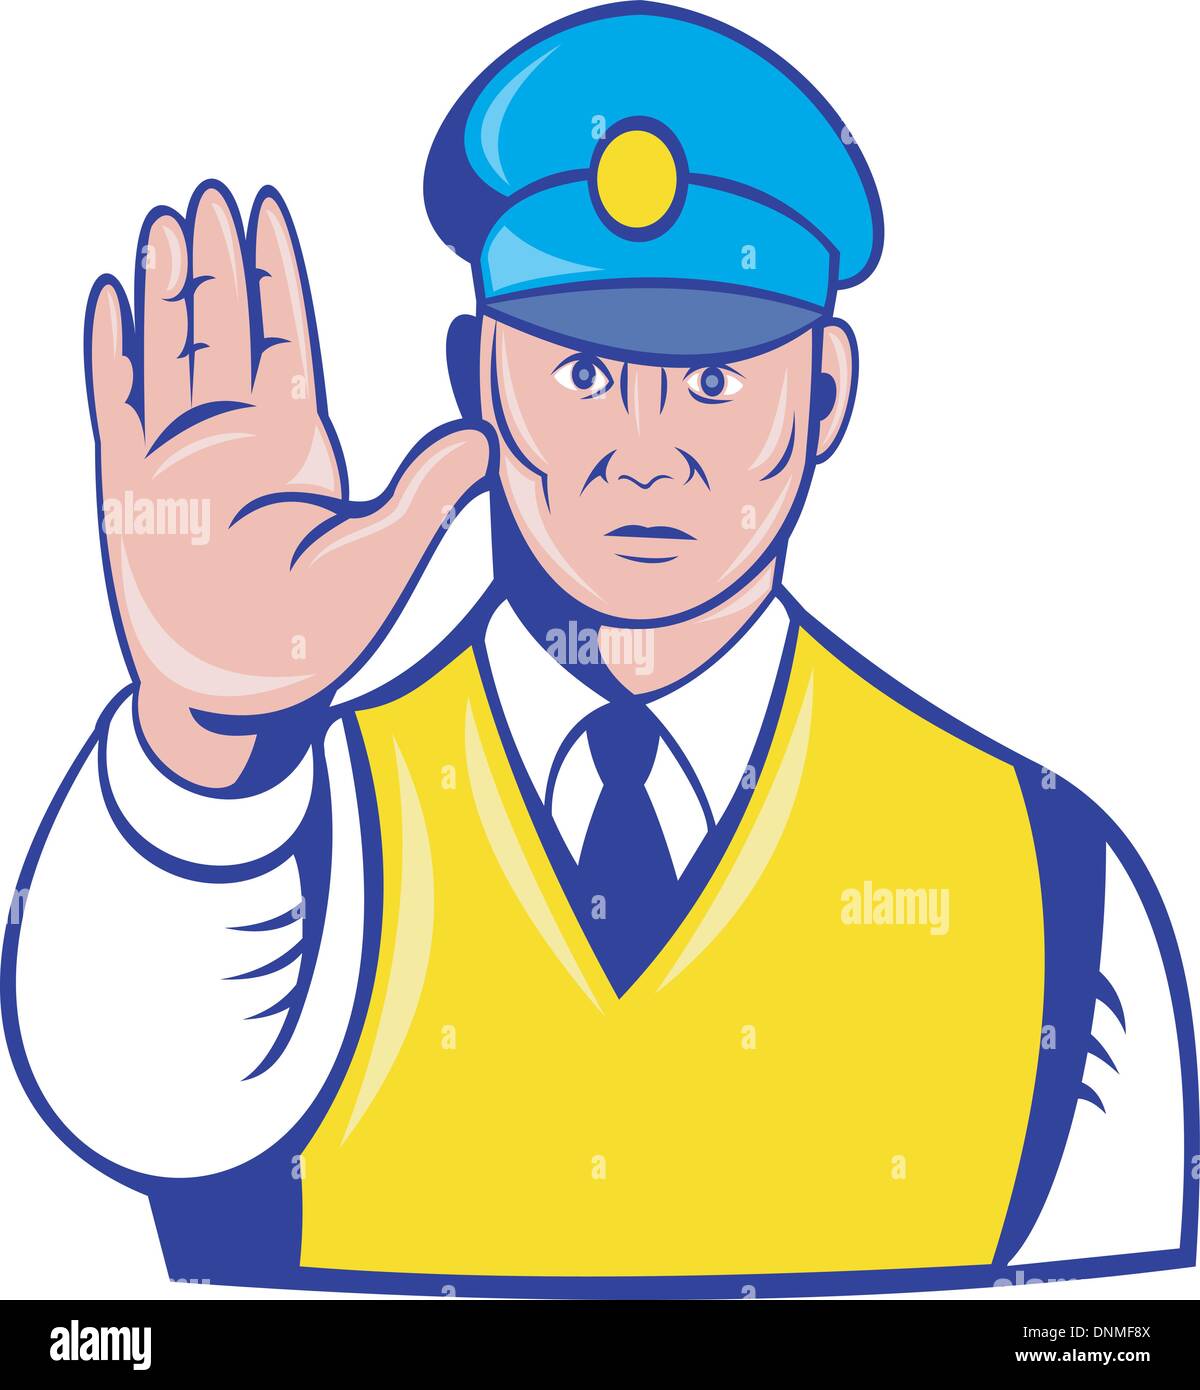 illustration of a police officer holding hand up to say stop Stock Vector